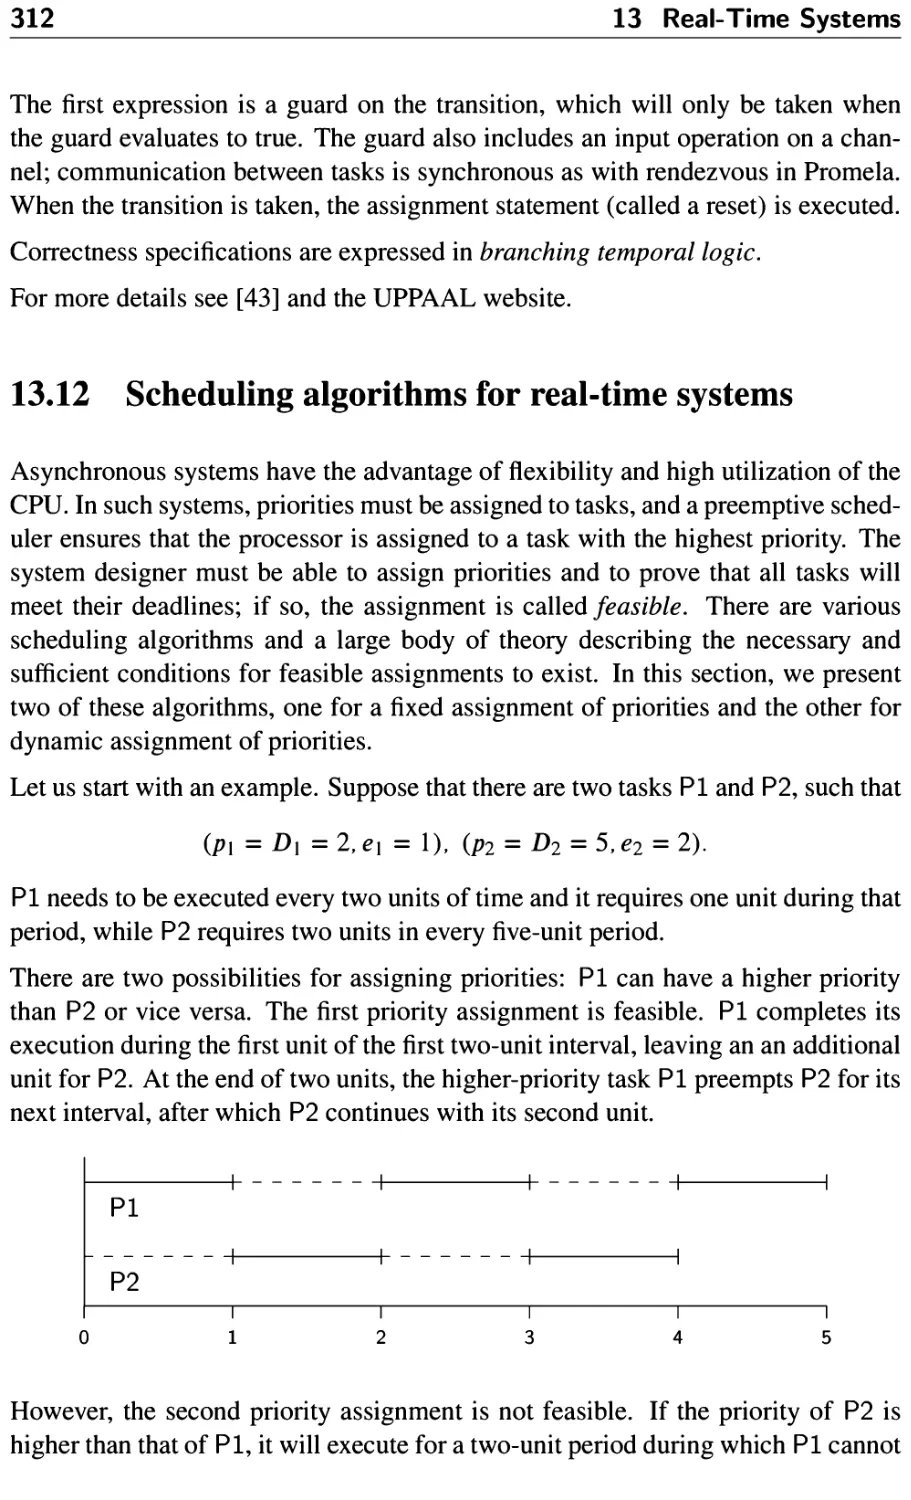 13.12 Scheduling algorithms for real-time systems